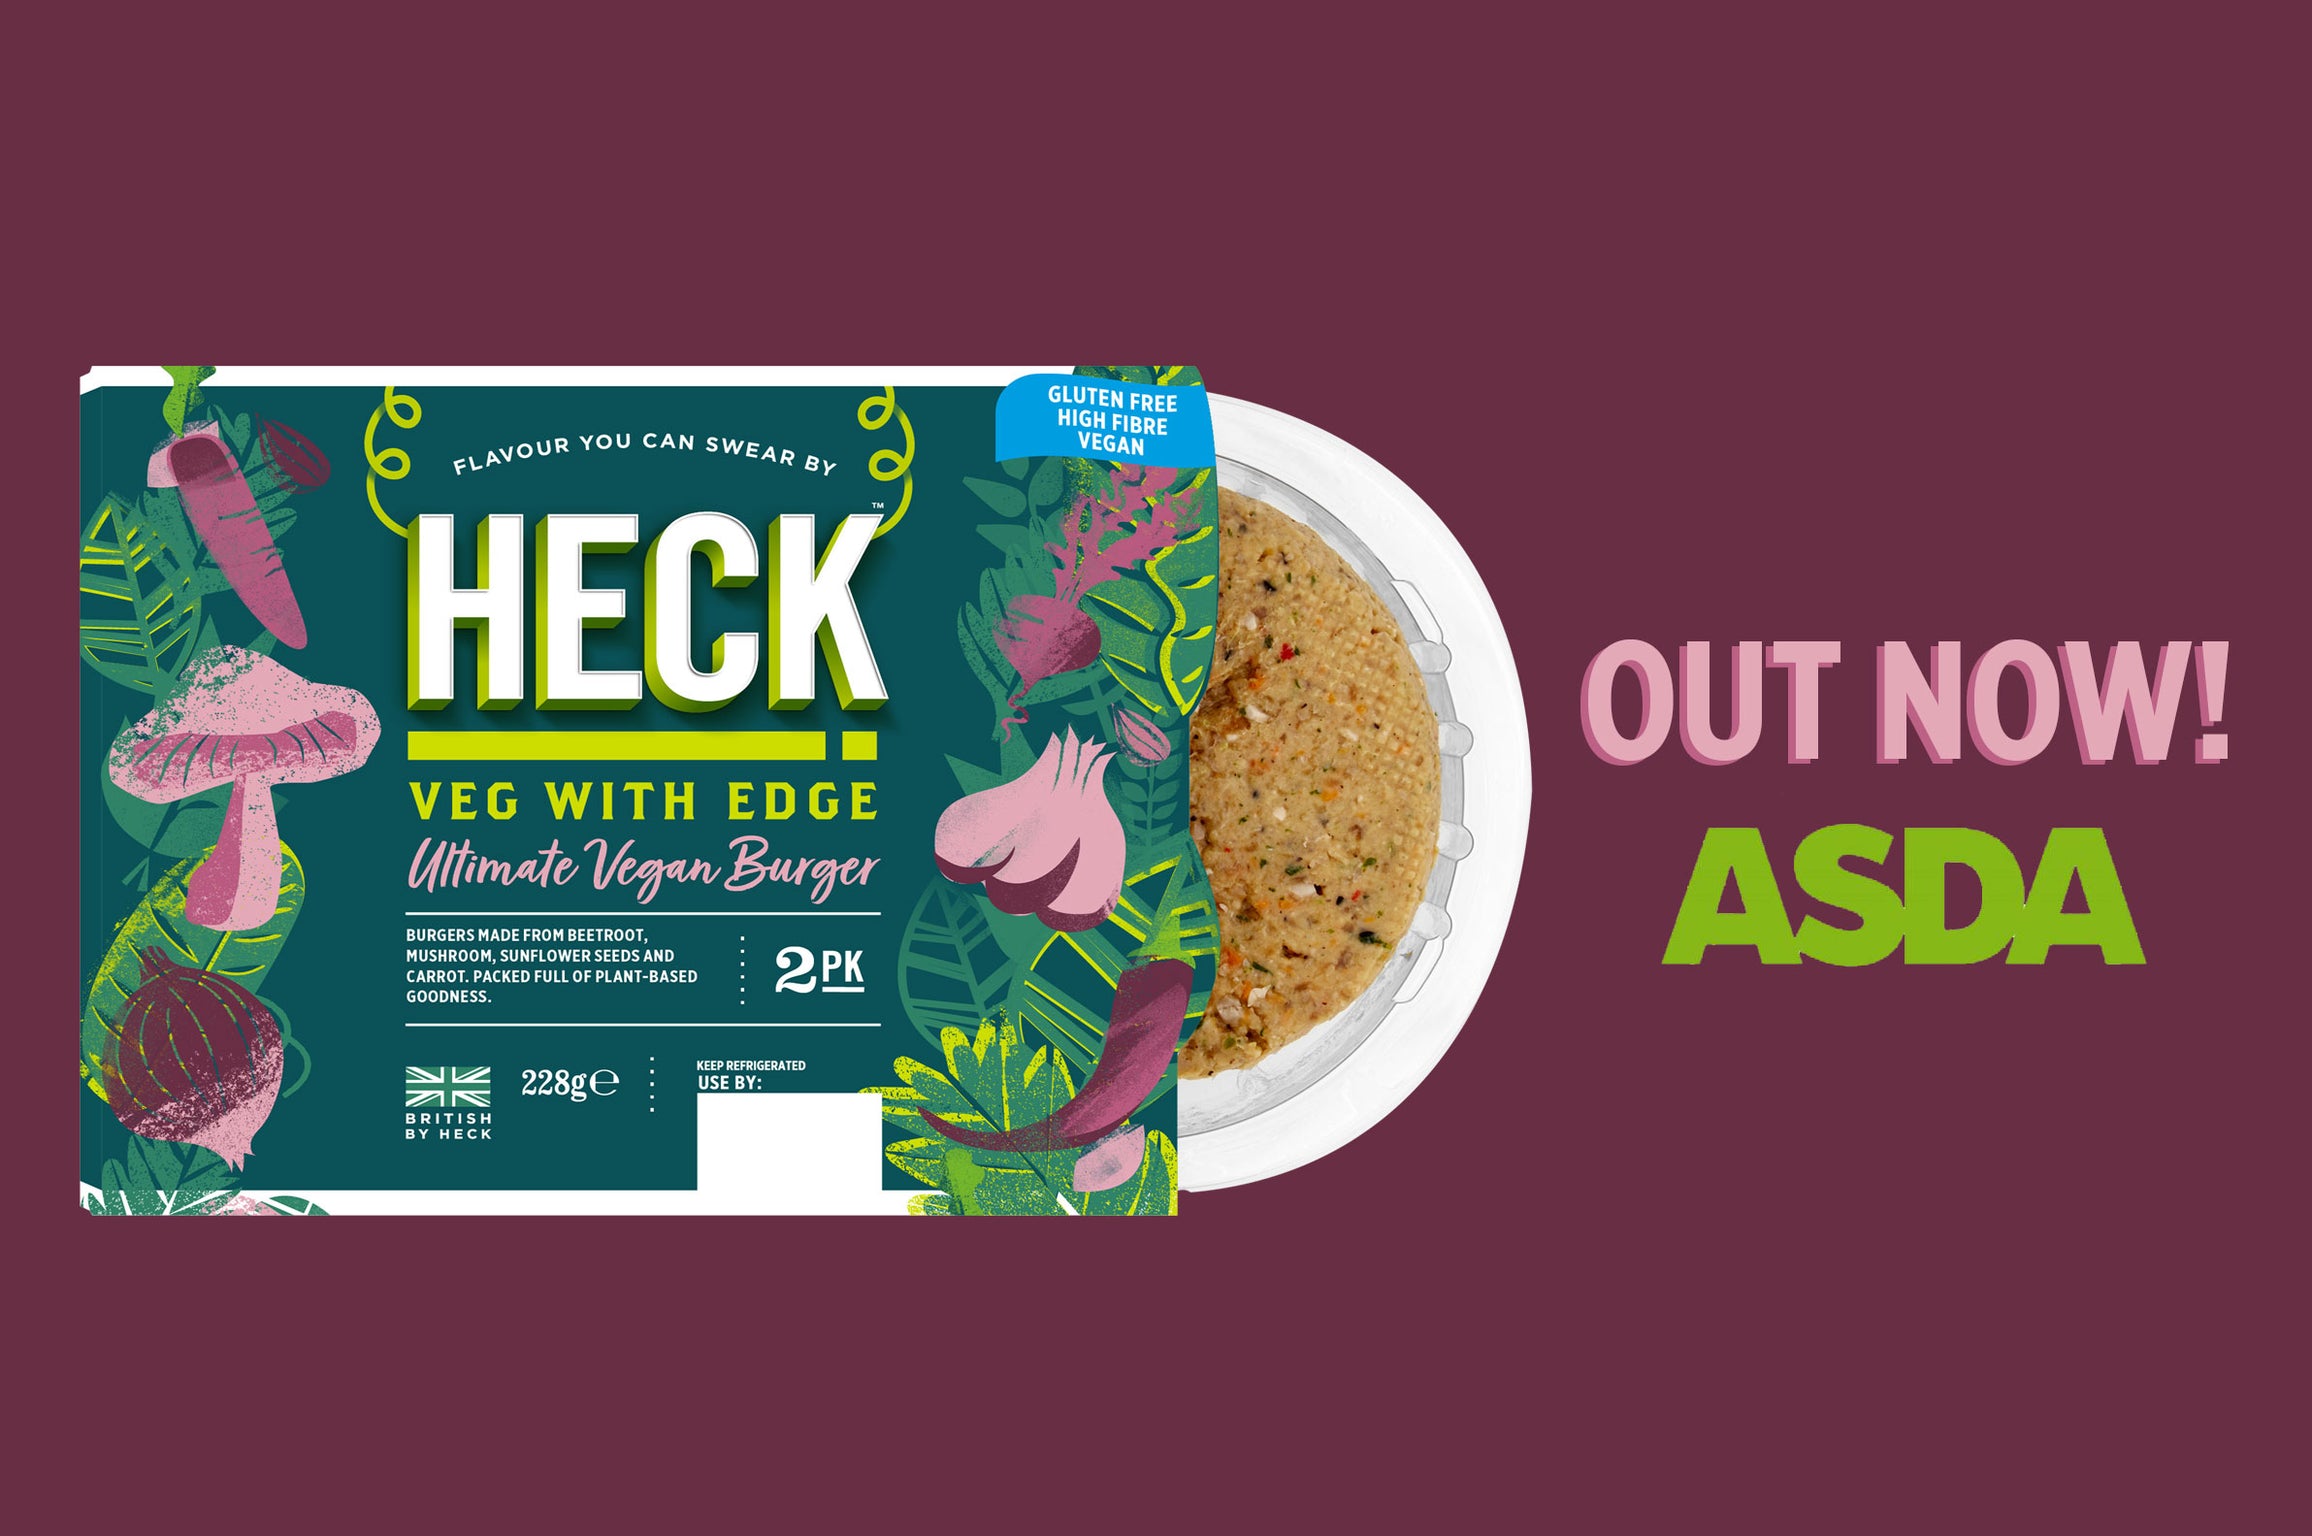 Sign Up For Veganuary In Your Nearest Asda, Find The HECK Ultimate Vegan Burger!